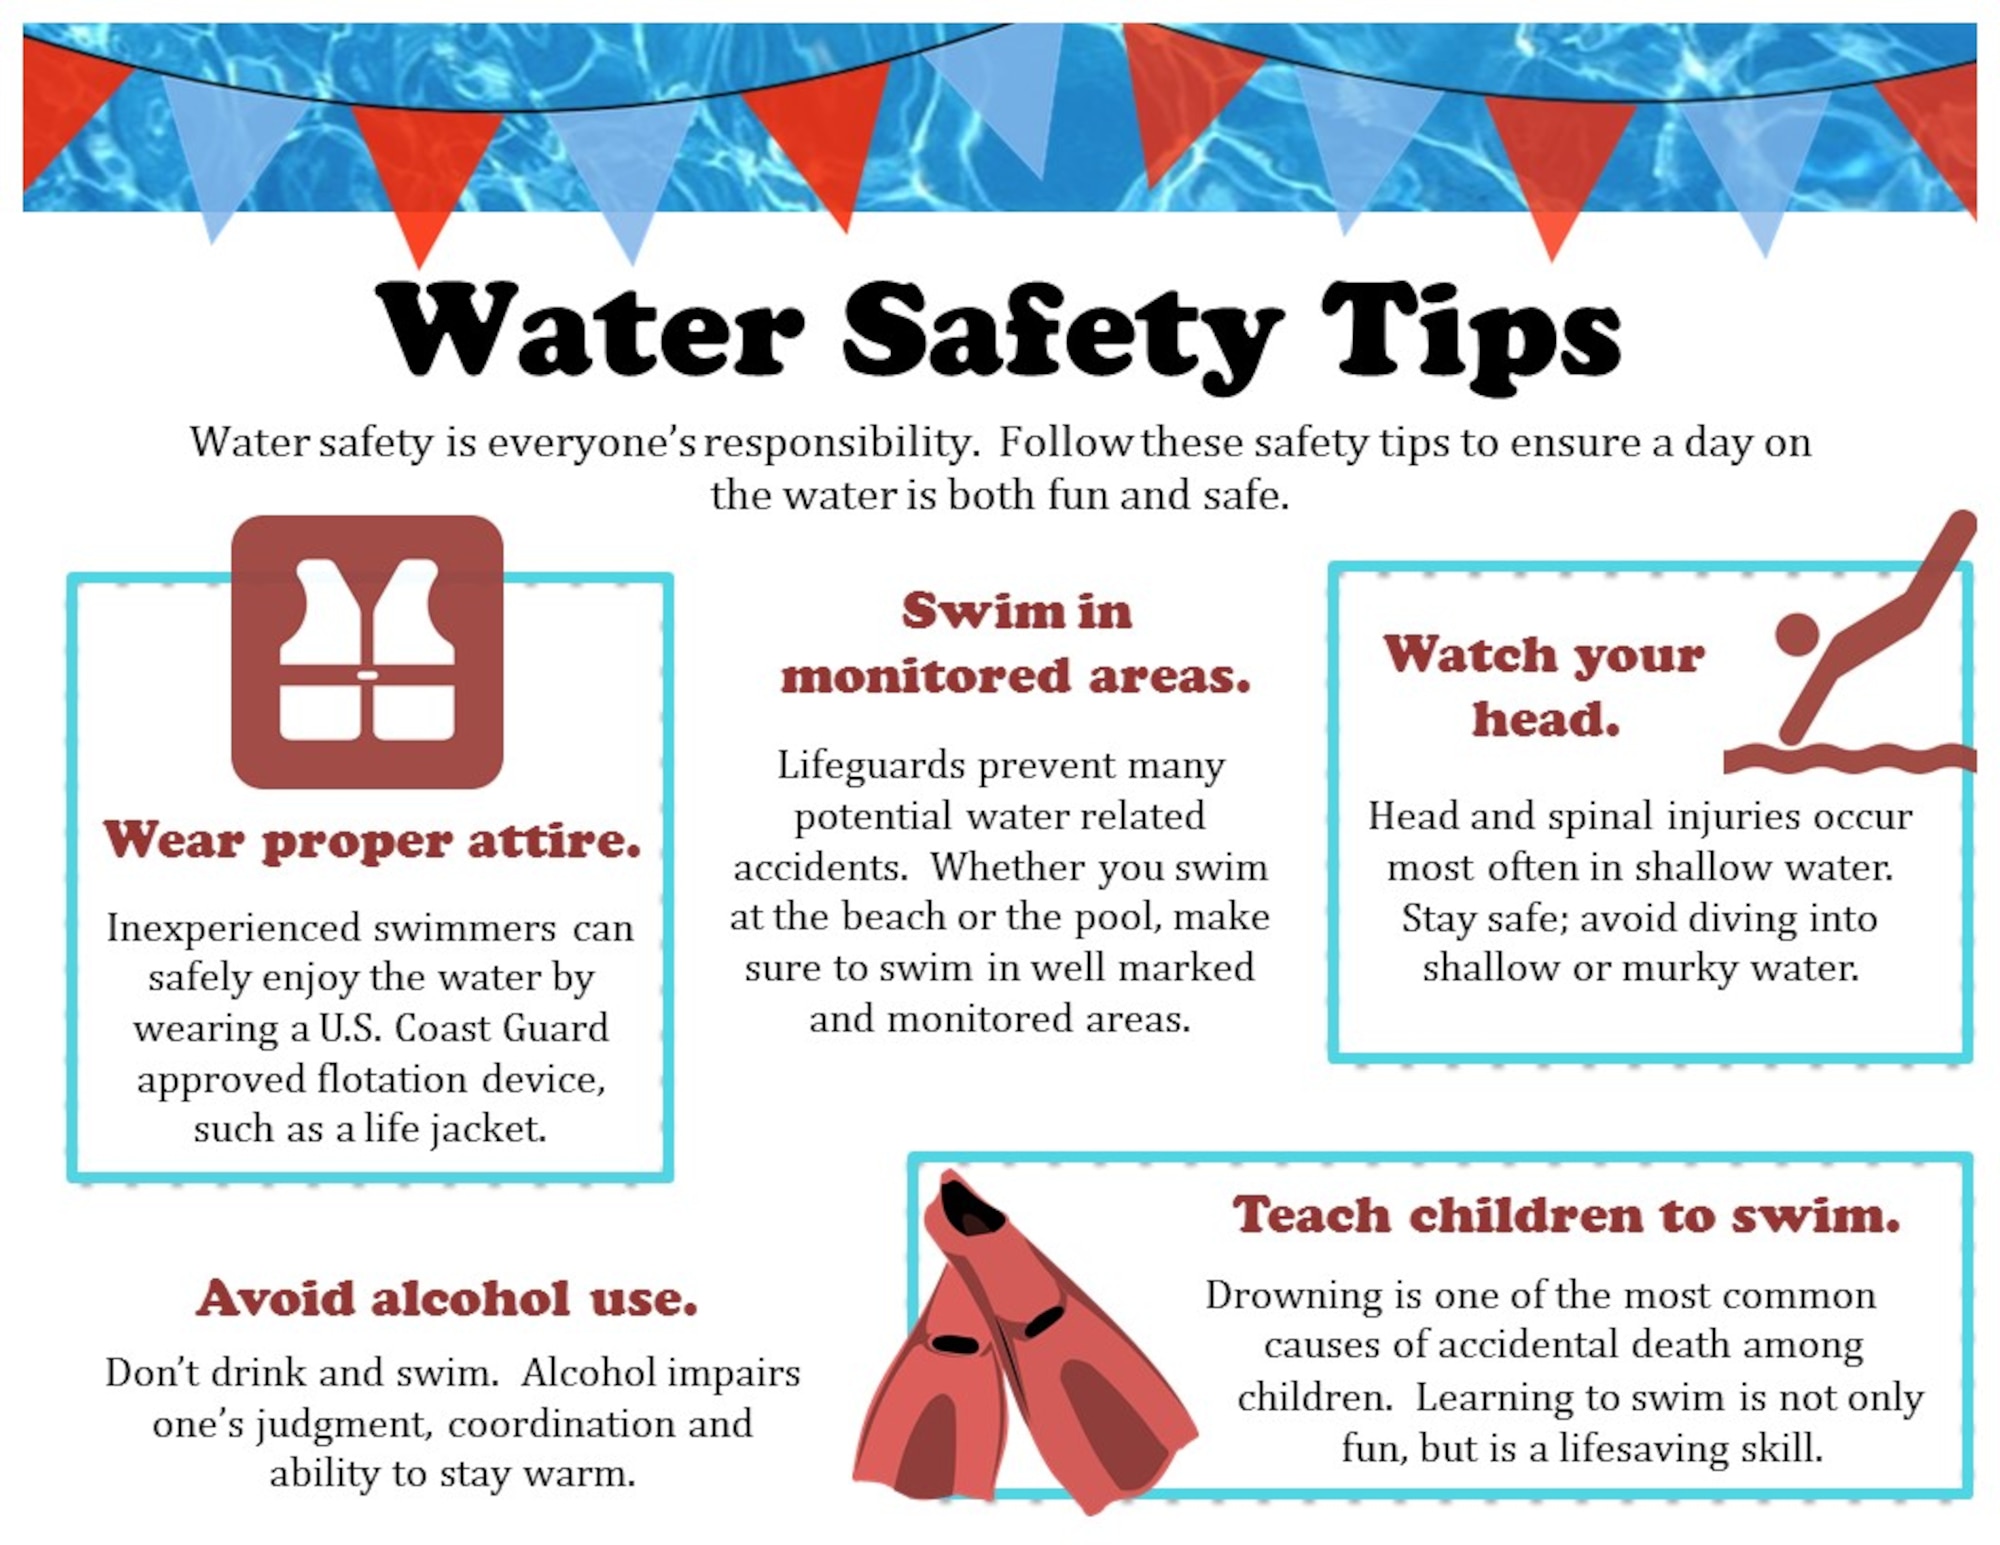 Do Water Wings Ensure or Endanger Your Child's Safety?